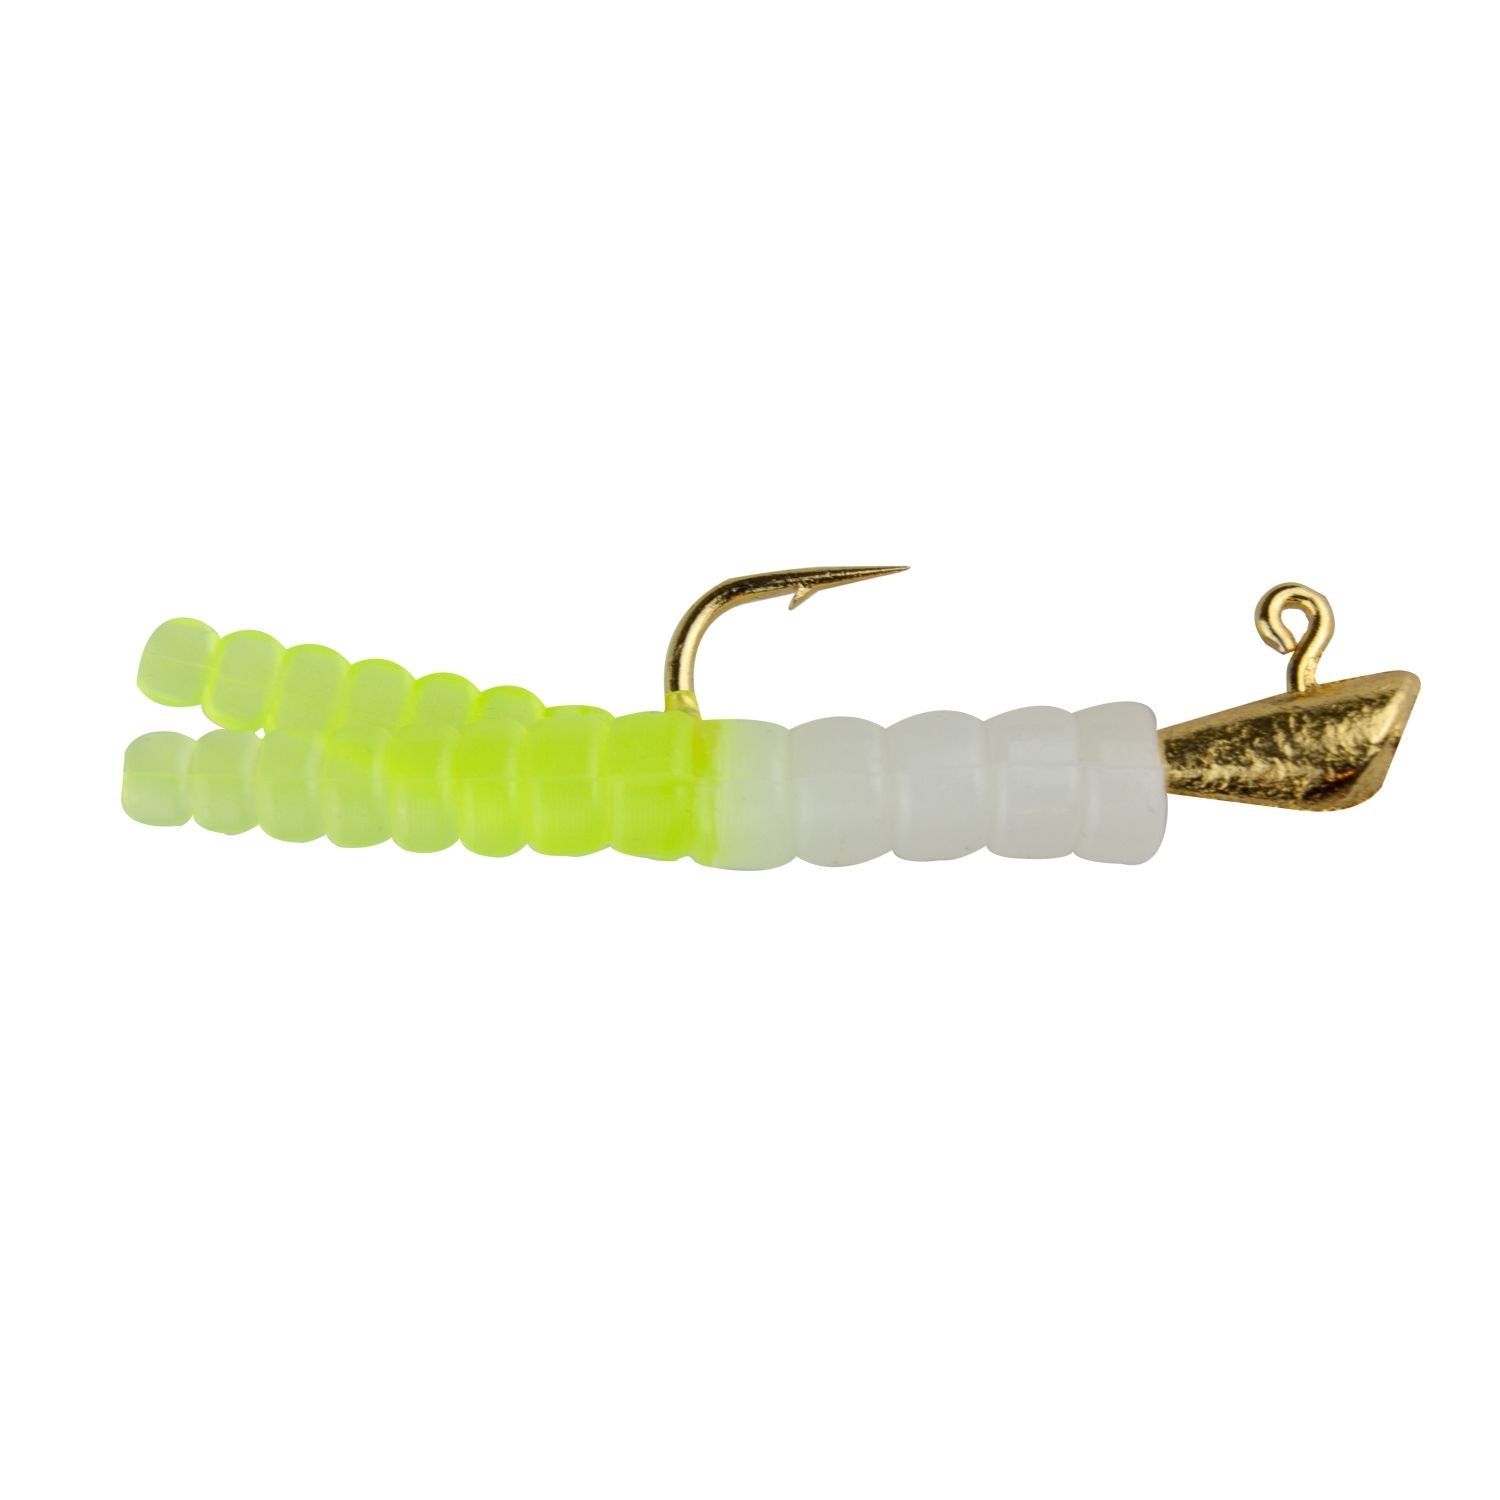 Leland Lures Trout Magnet, White